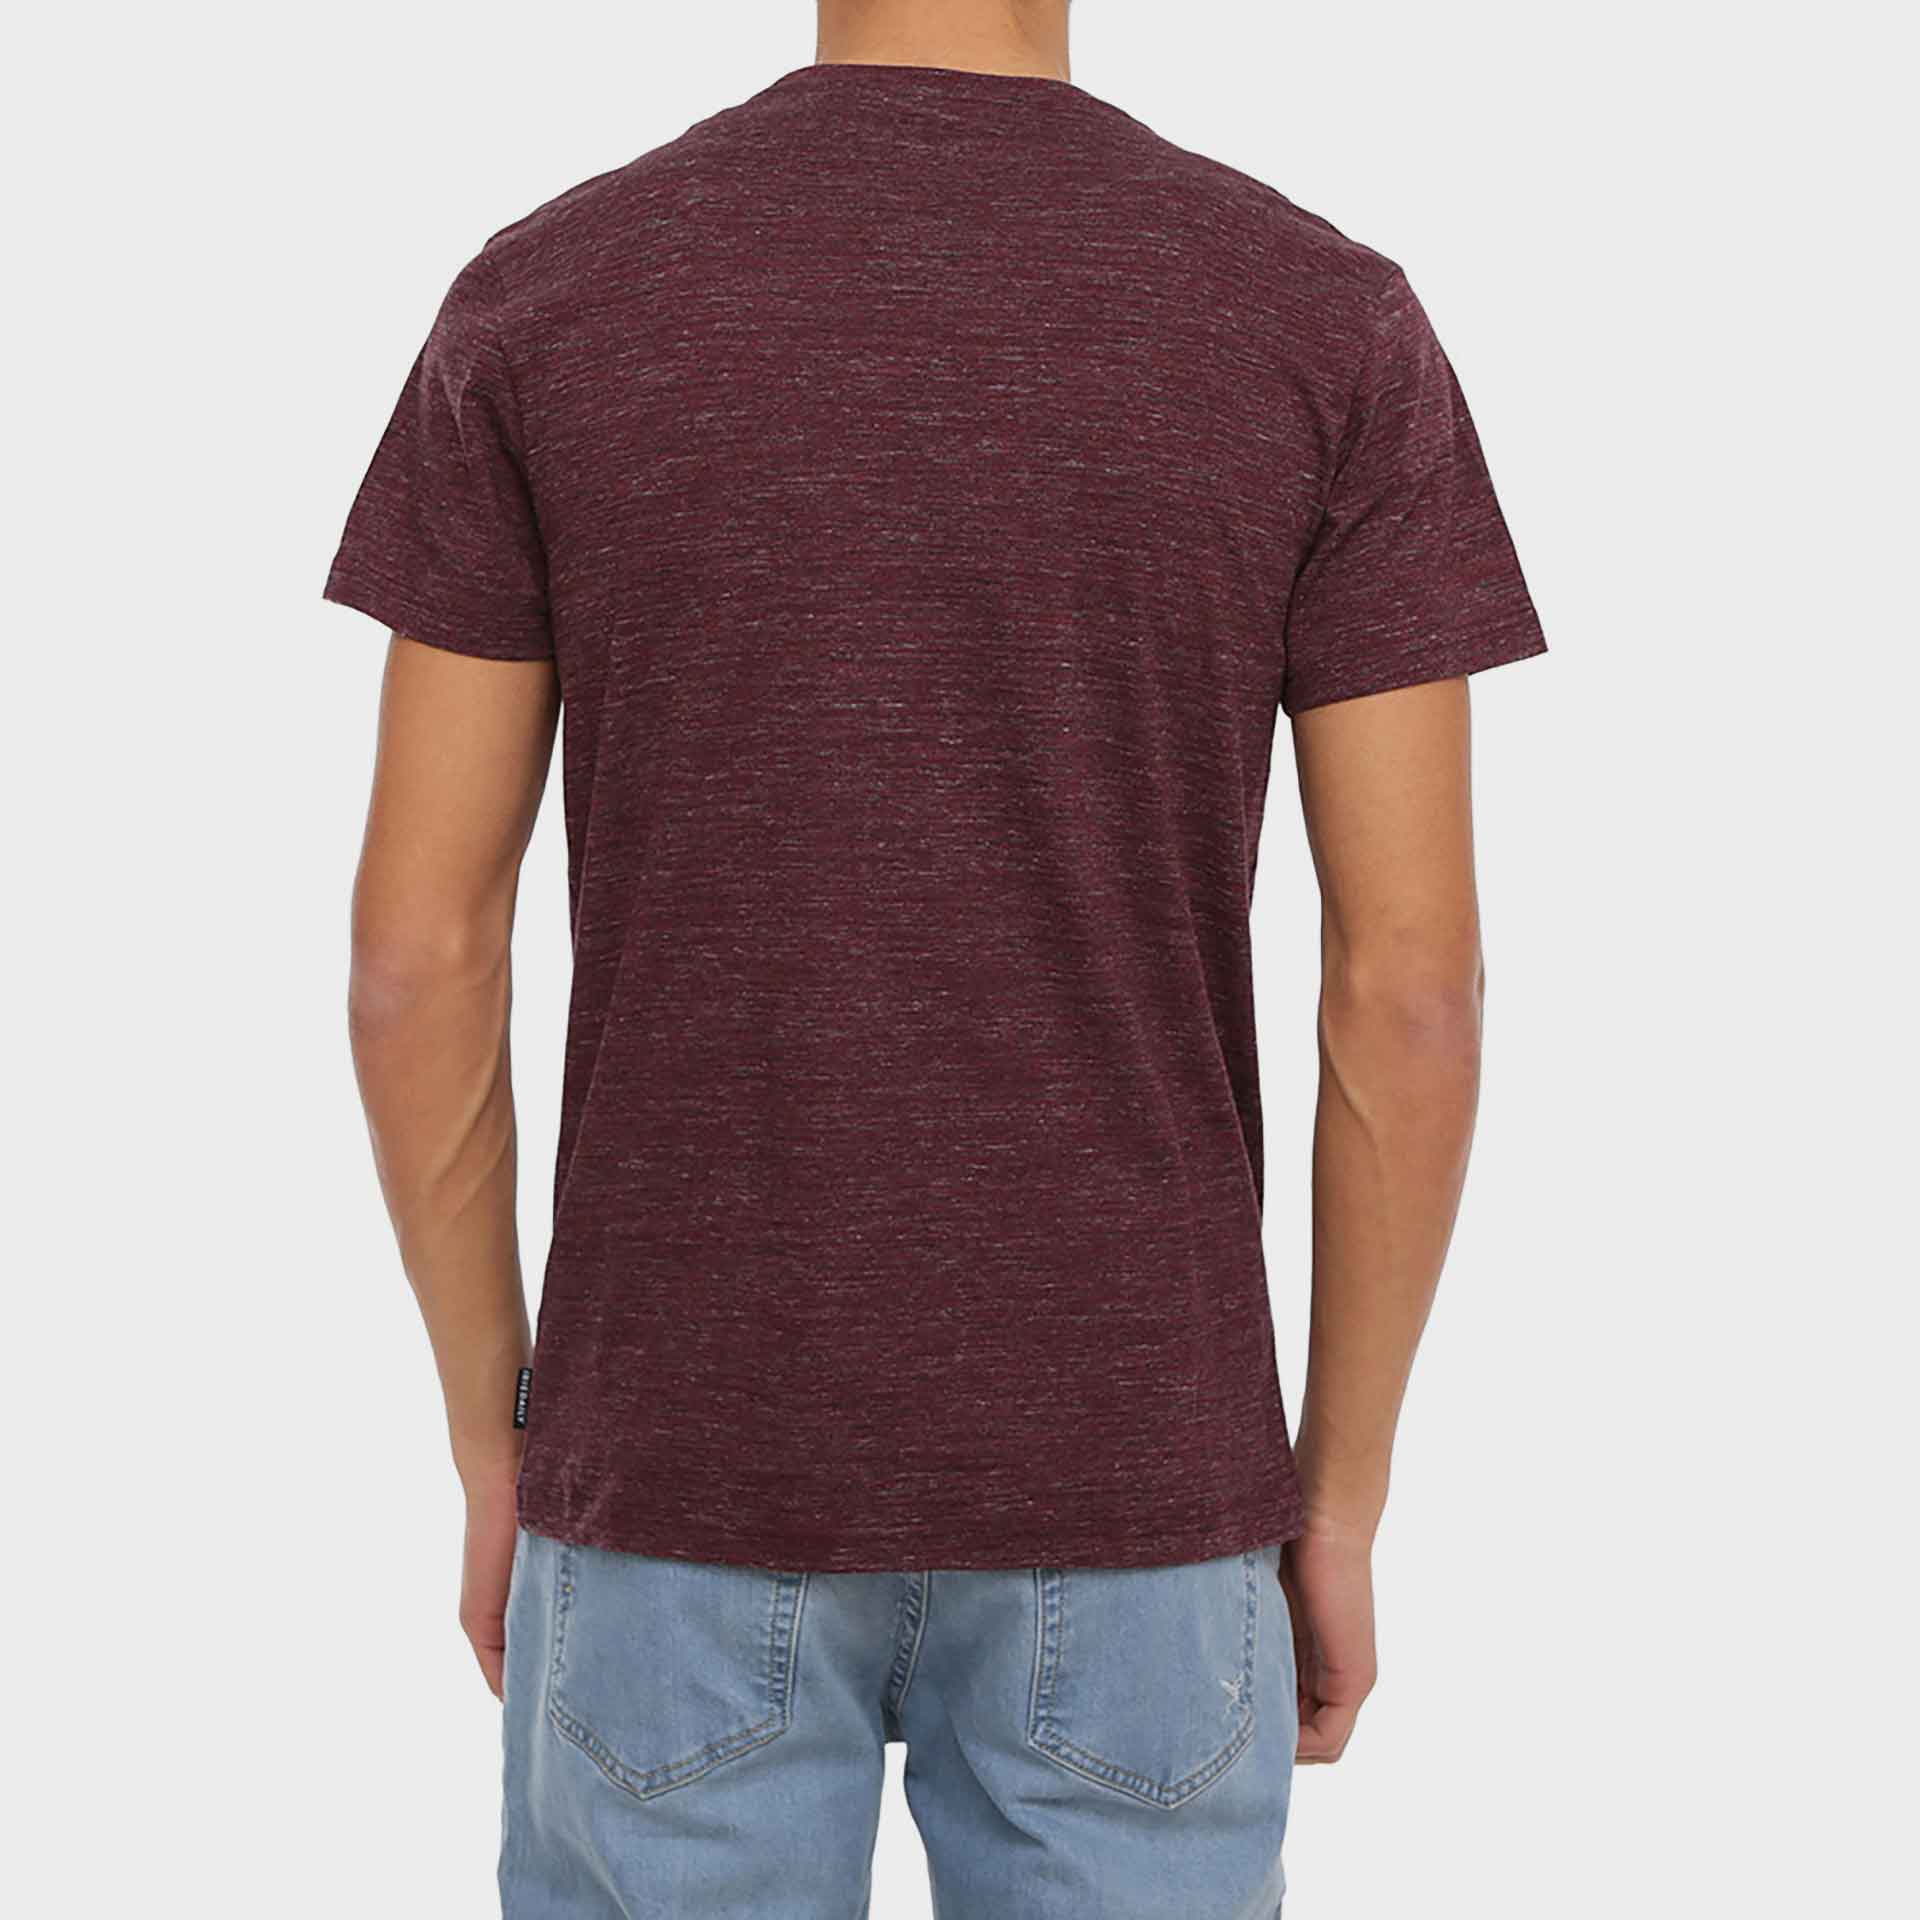 Iriedaily Chamisso Light Embroidered T-Shirt Maroon Melange